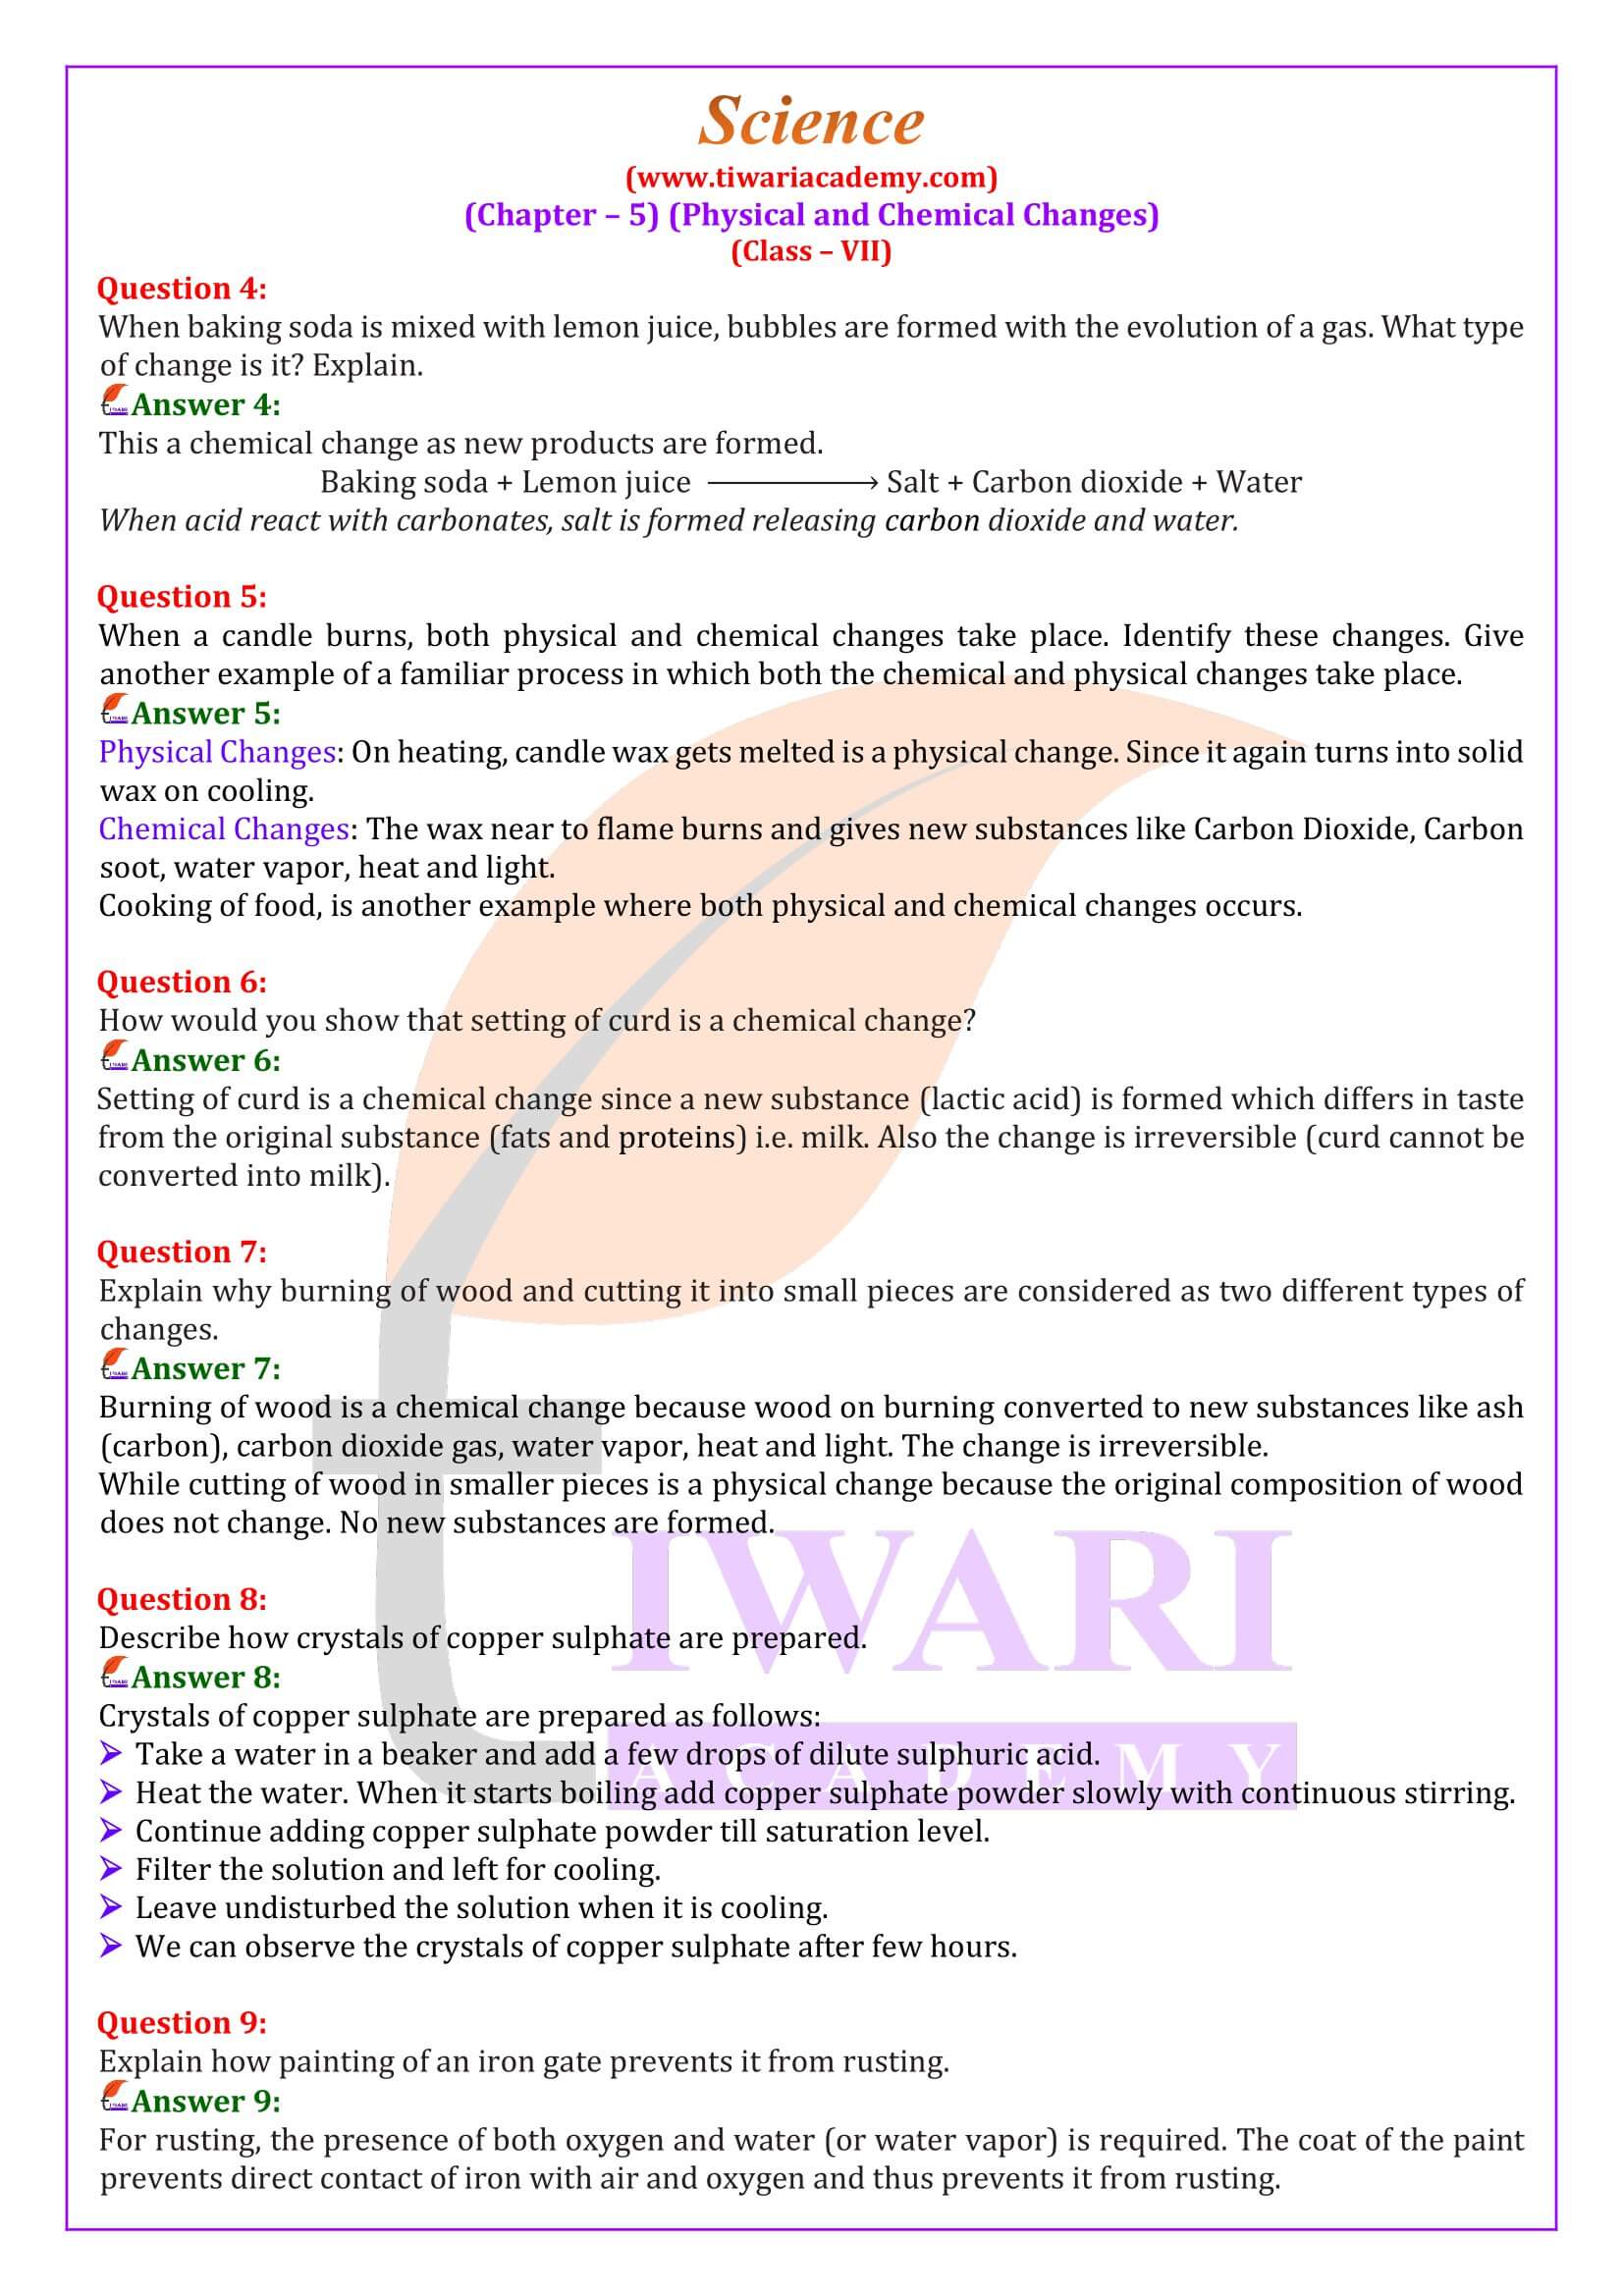 NCERT Solutions for Class 7 Science Chapter 5 in English Medium